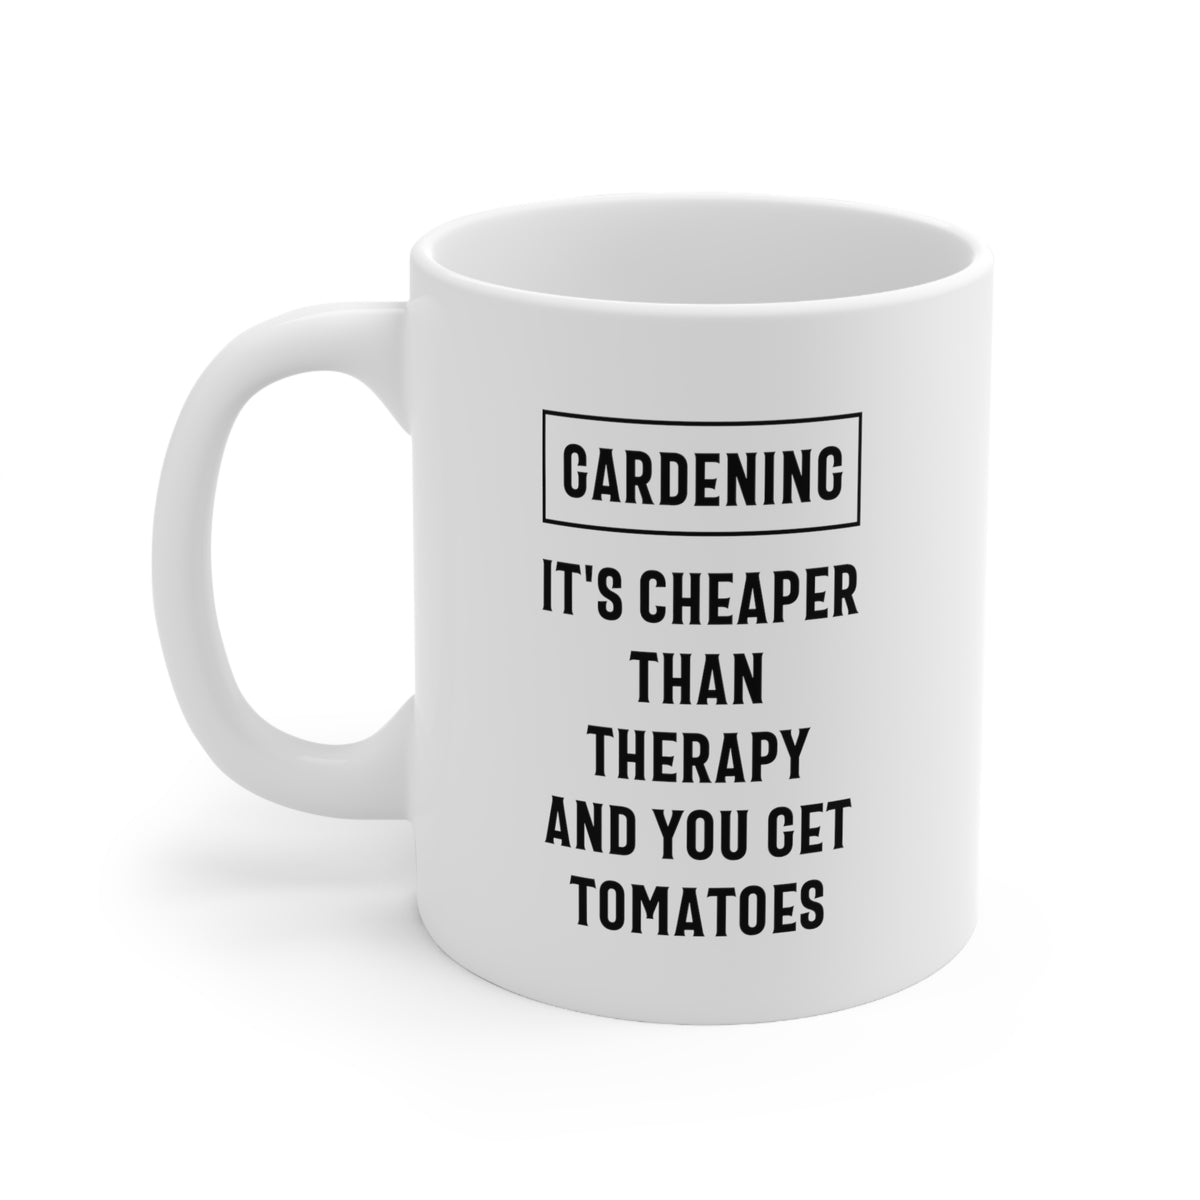 Florist Coffee Mug - Gardening It's Cheaper Than Therapy and You Get Tomatoes Cup - Funny Gardening Gifts For Men Women Visit the Proud Gifts Store